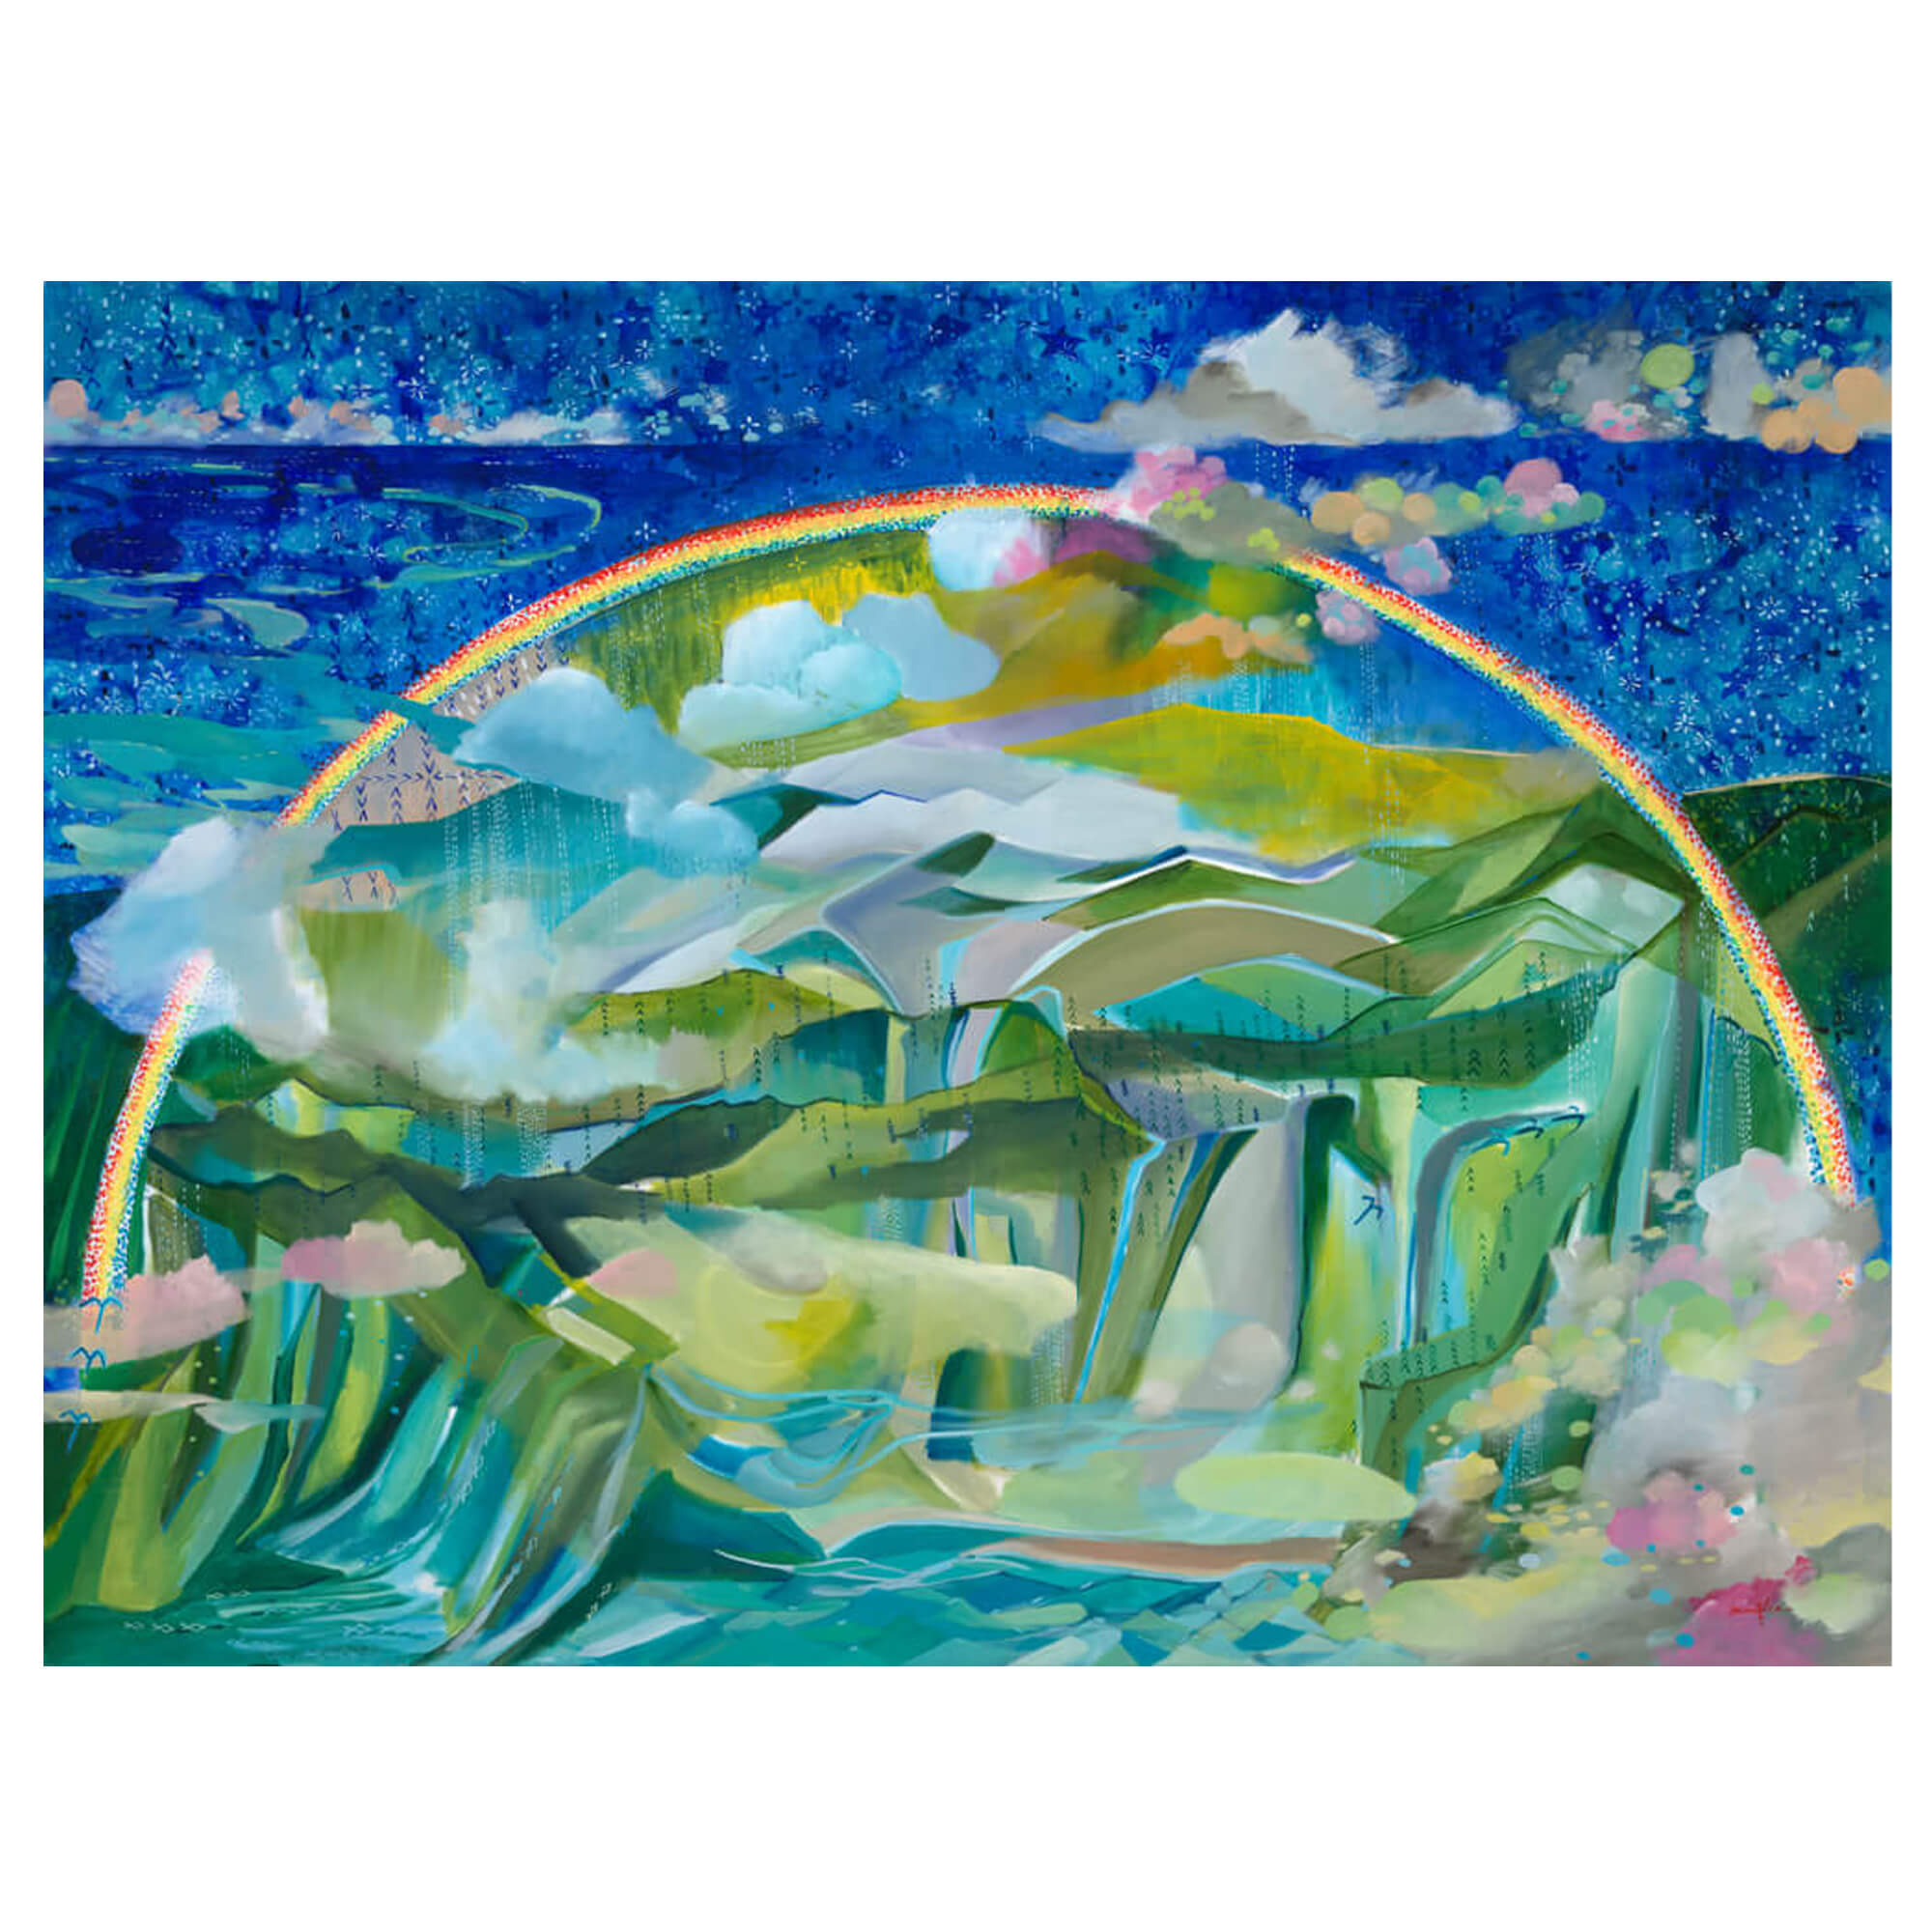 A paper art print of an abstract landscape with a rainbow over the mountains by Hawaii artist Saumolia Puapuaga